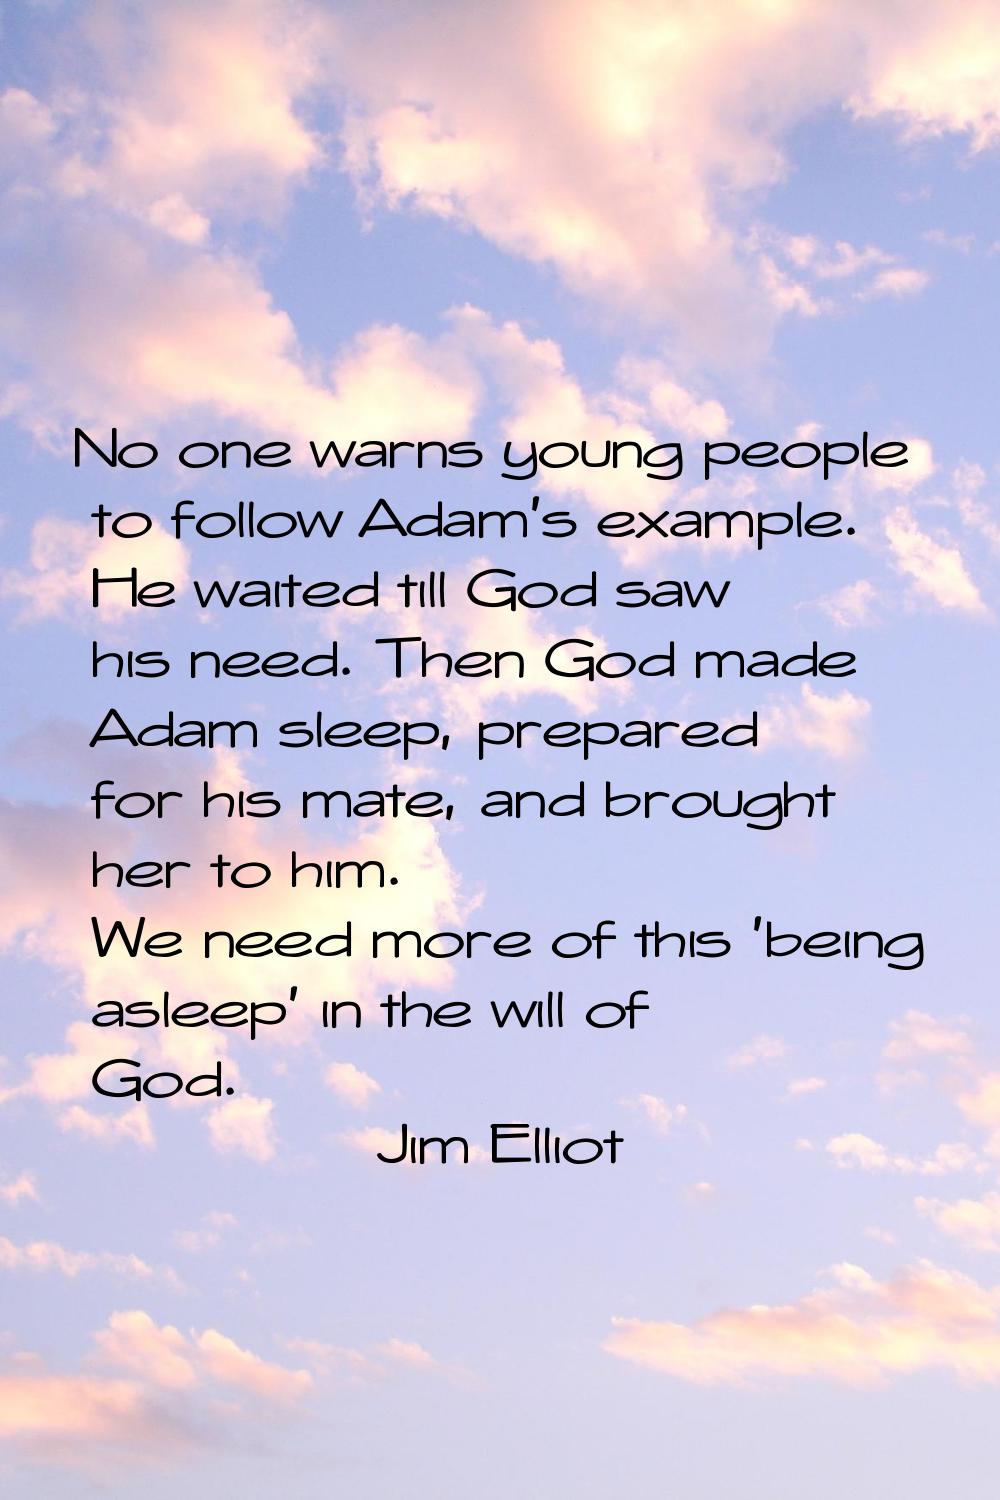 No one warns young people to follow Adam's example. He waited till God saw his need. Then God made 